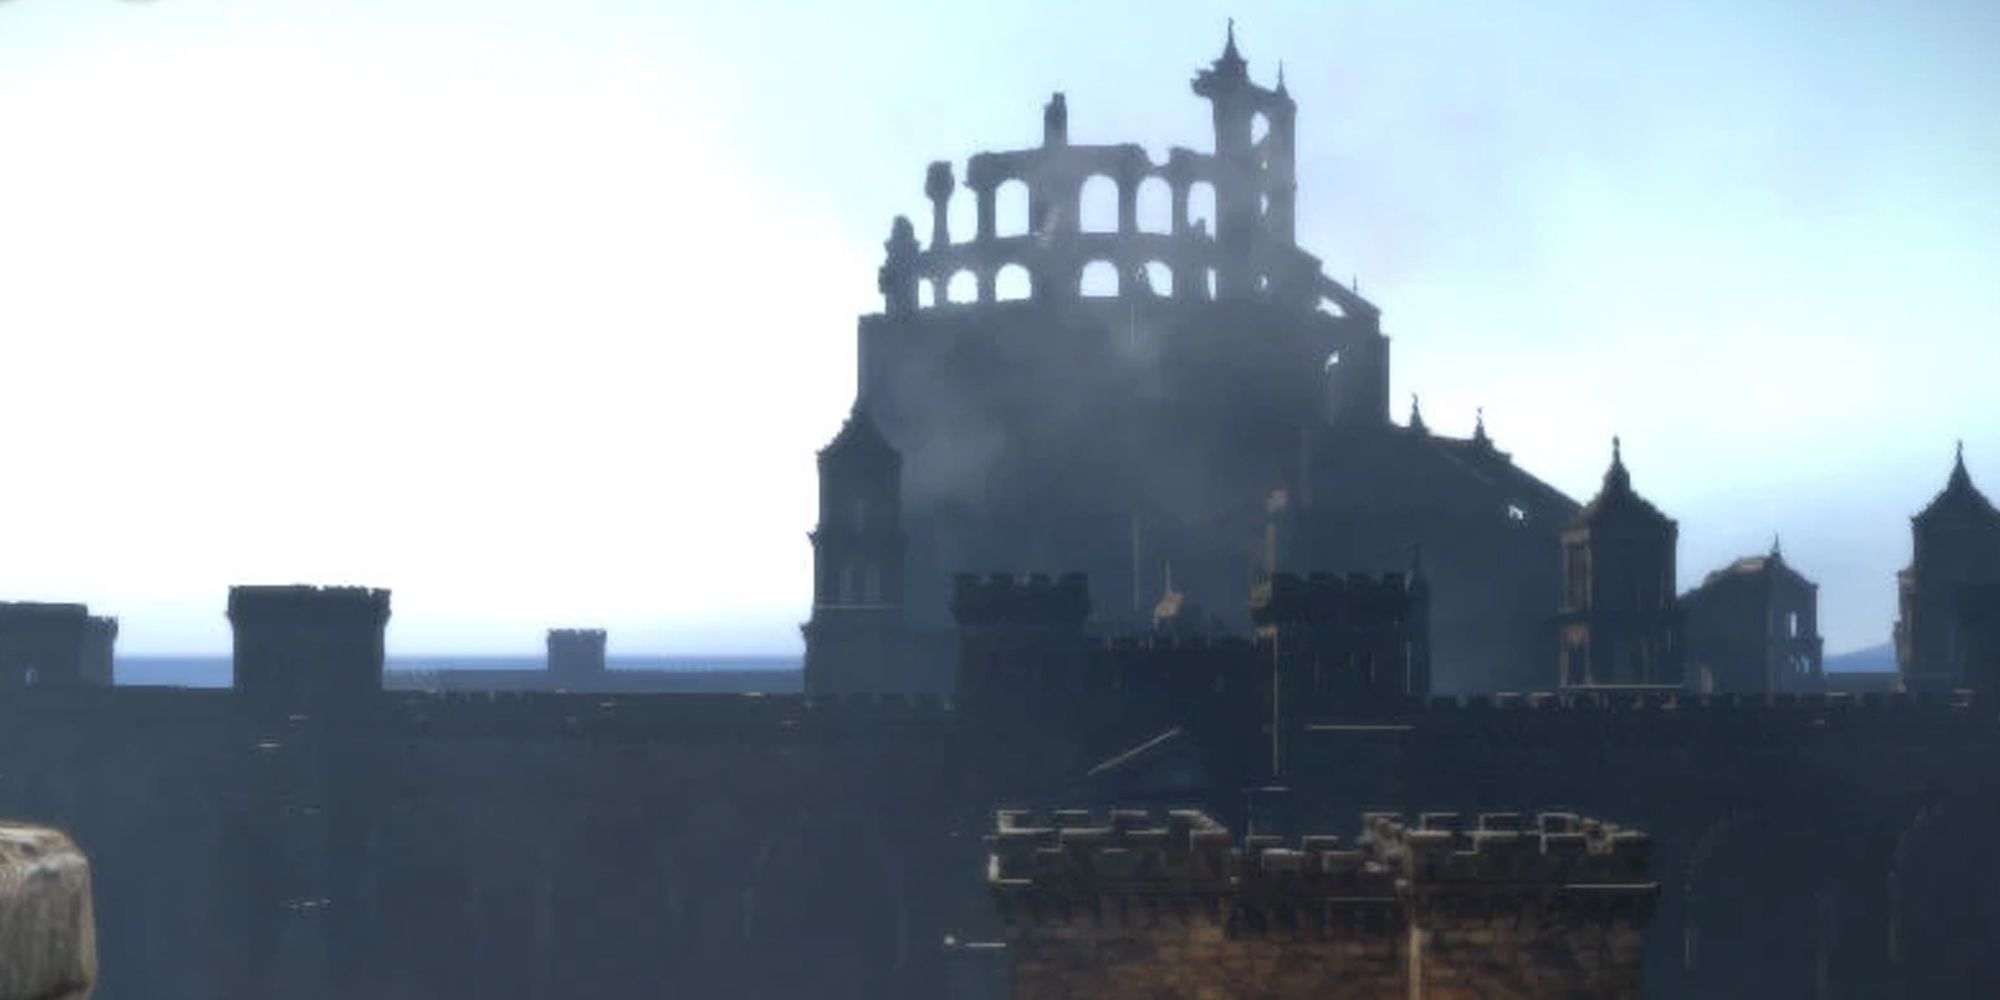 Dragon's Dogma Blue Moon Tower behind the Wall